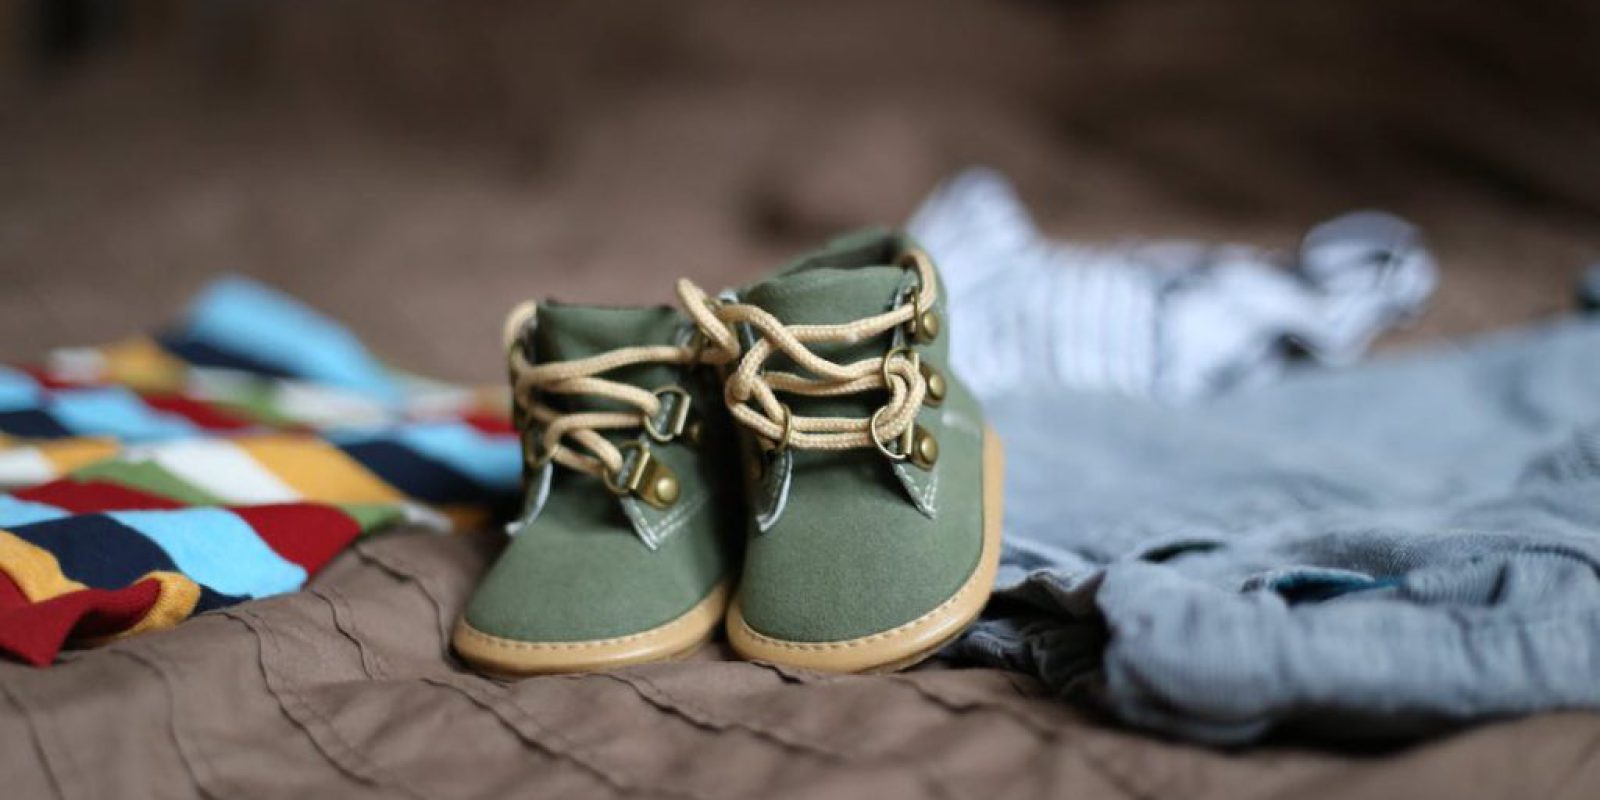 shoes-pregnancy-child-clothing-47220